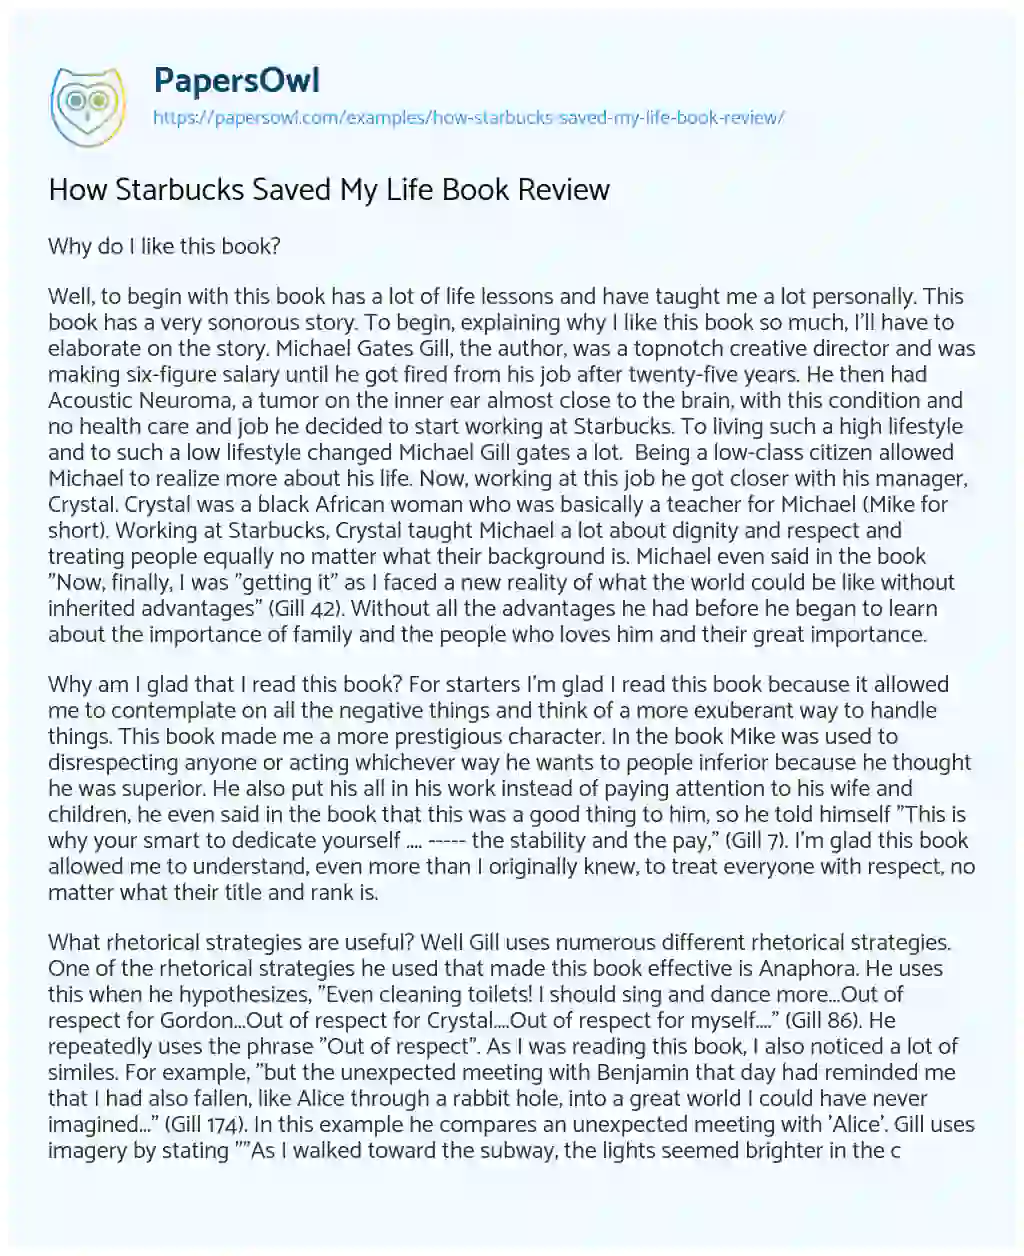 Essay on How Starbucks Saved my Life Book Review